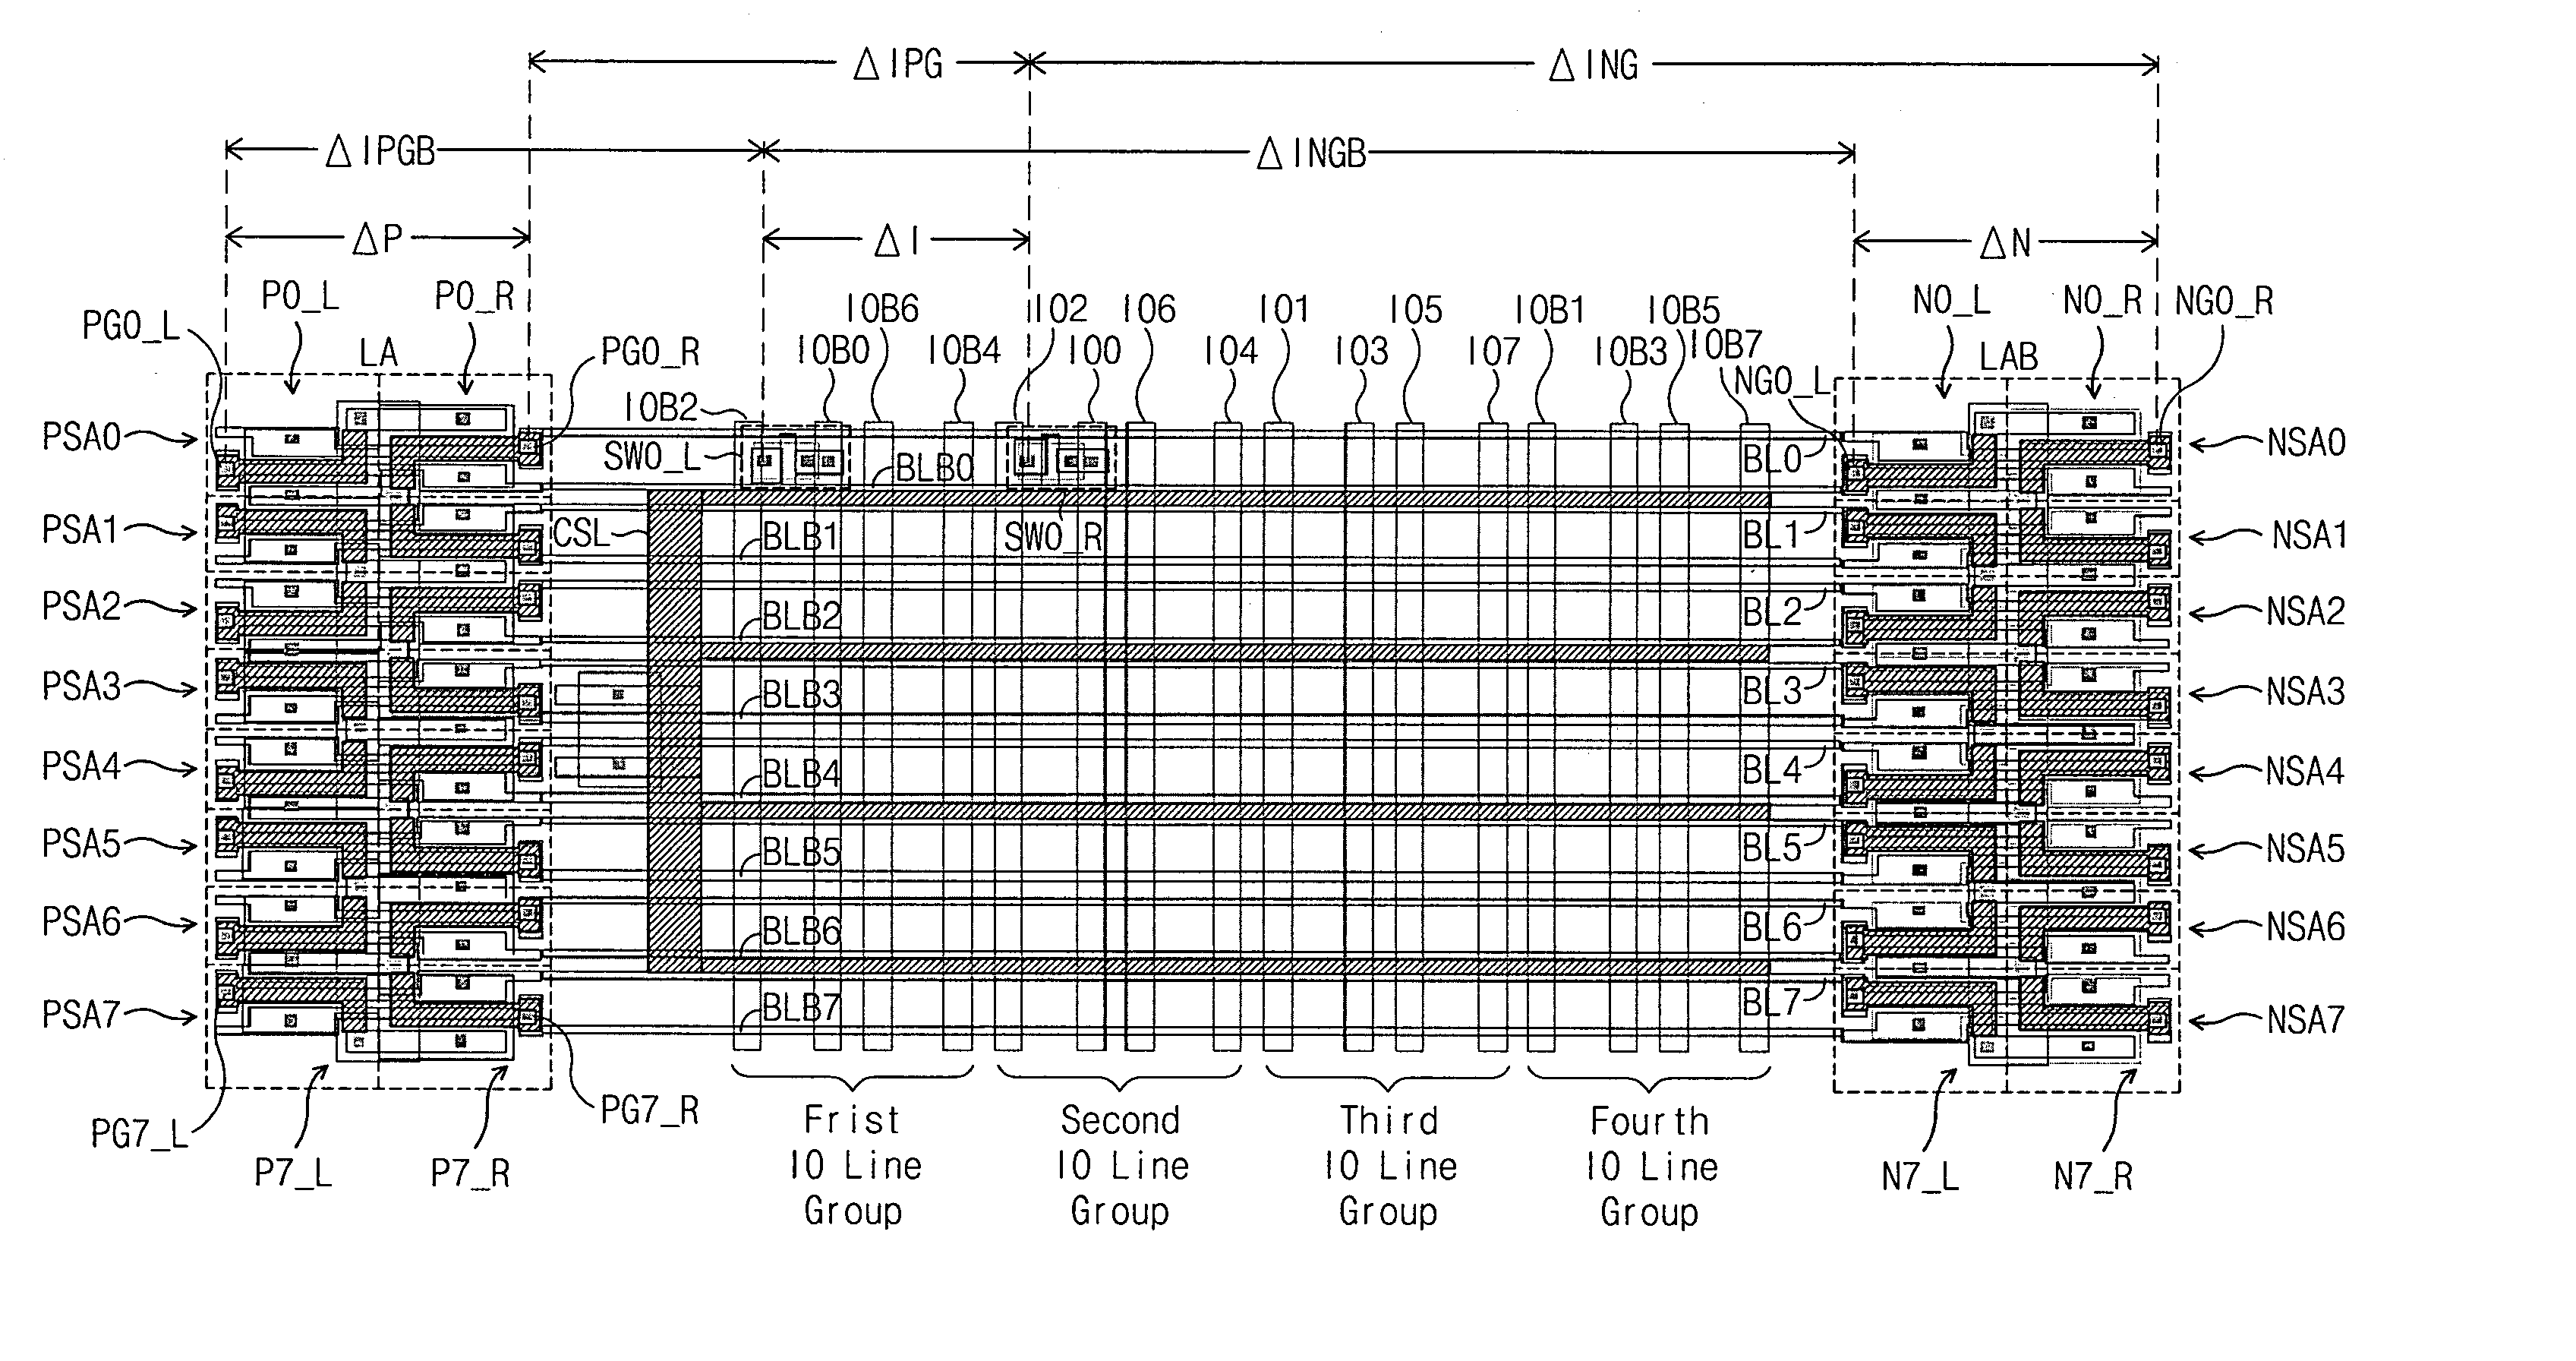 Layout structure of bit line sense amplifier of semiconductor memory device